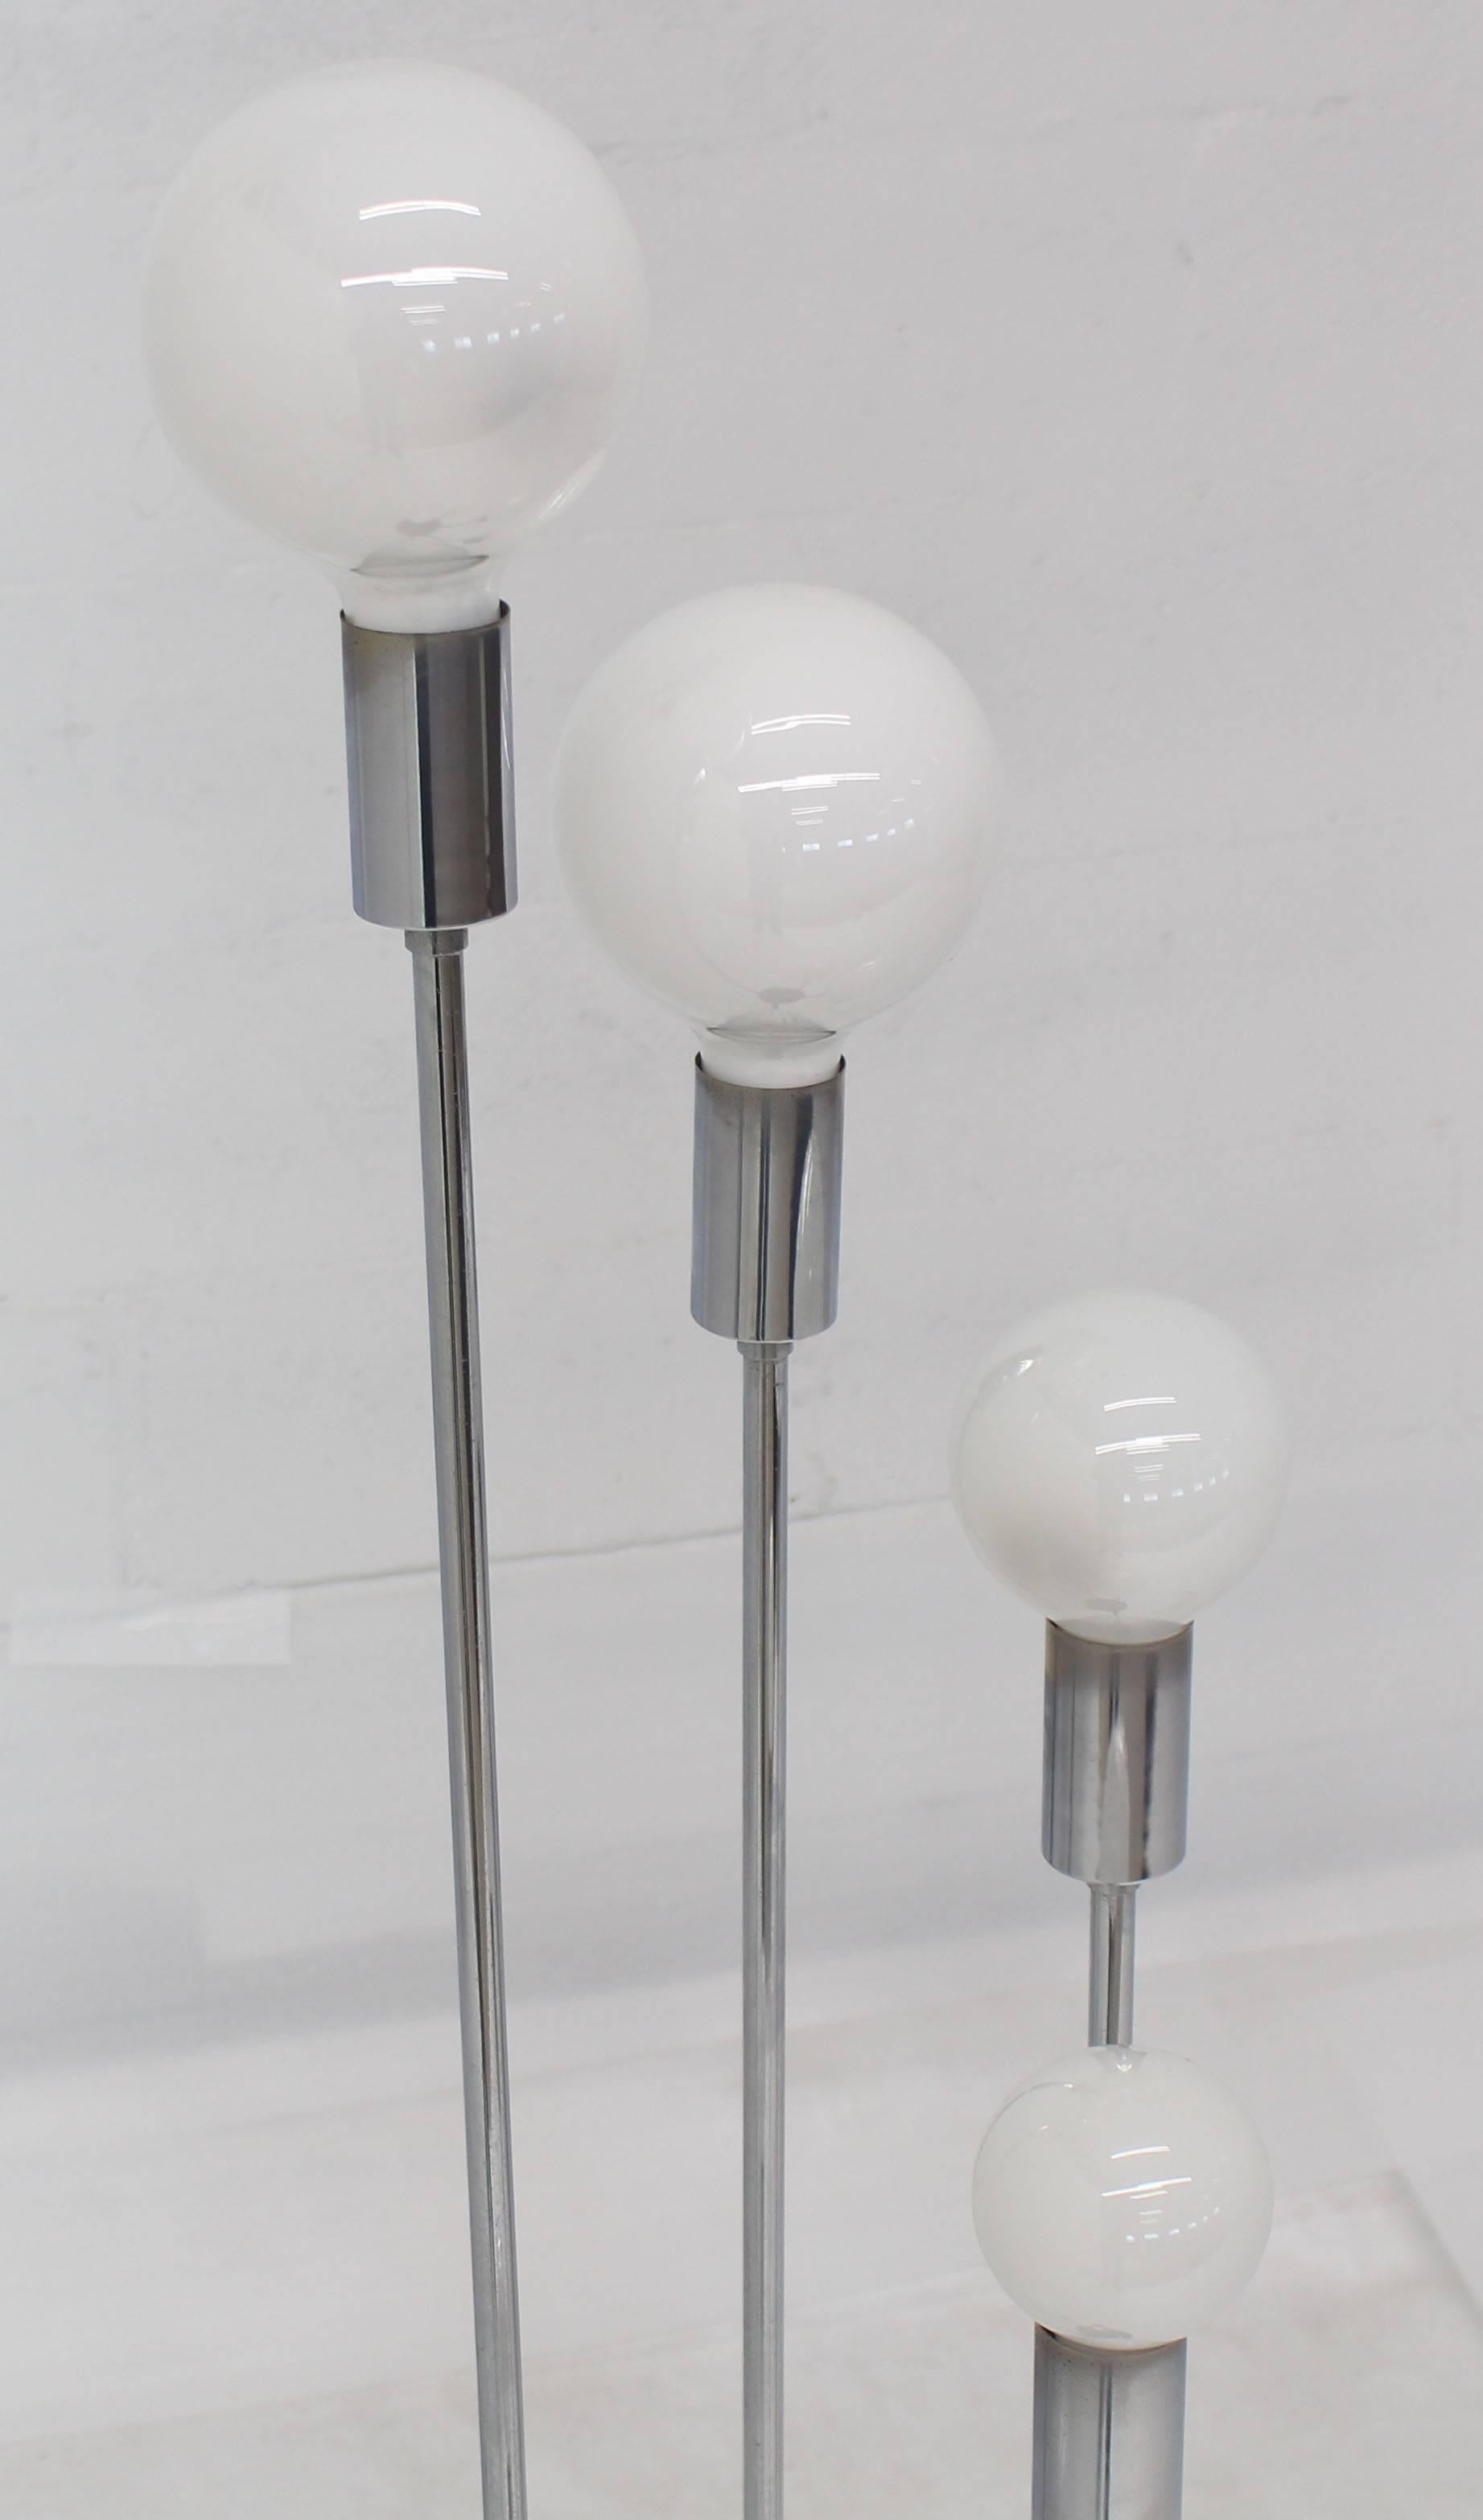 Polished 3 Way 5 Globes Spiral Chrome Mid Century Modern Floor Lamps on Round Base 